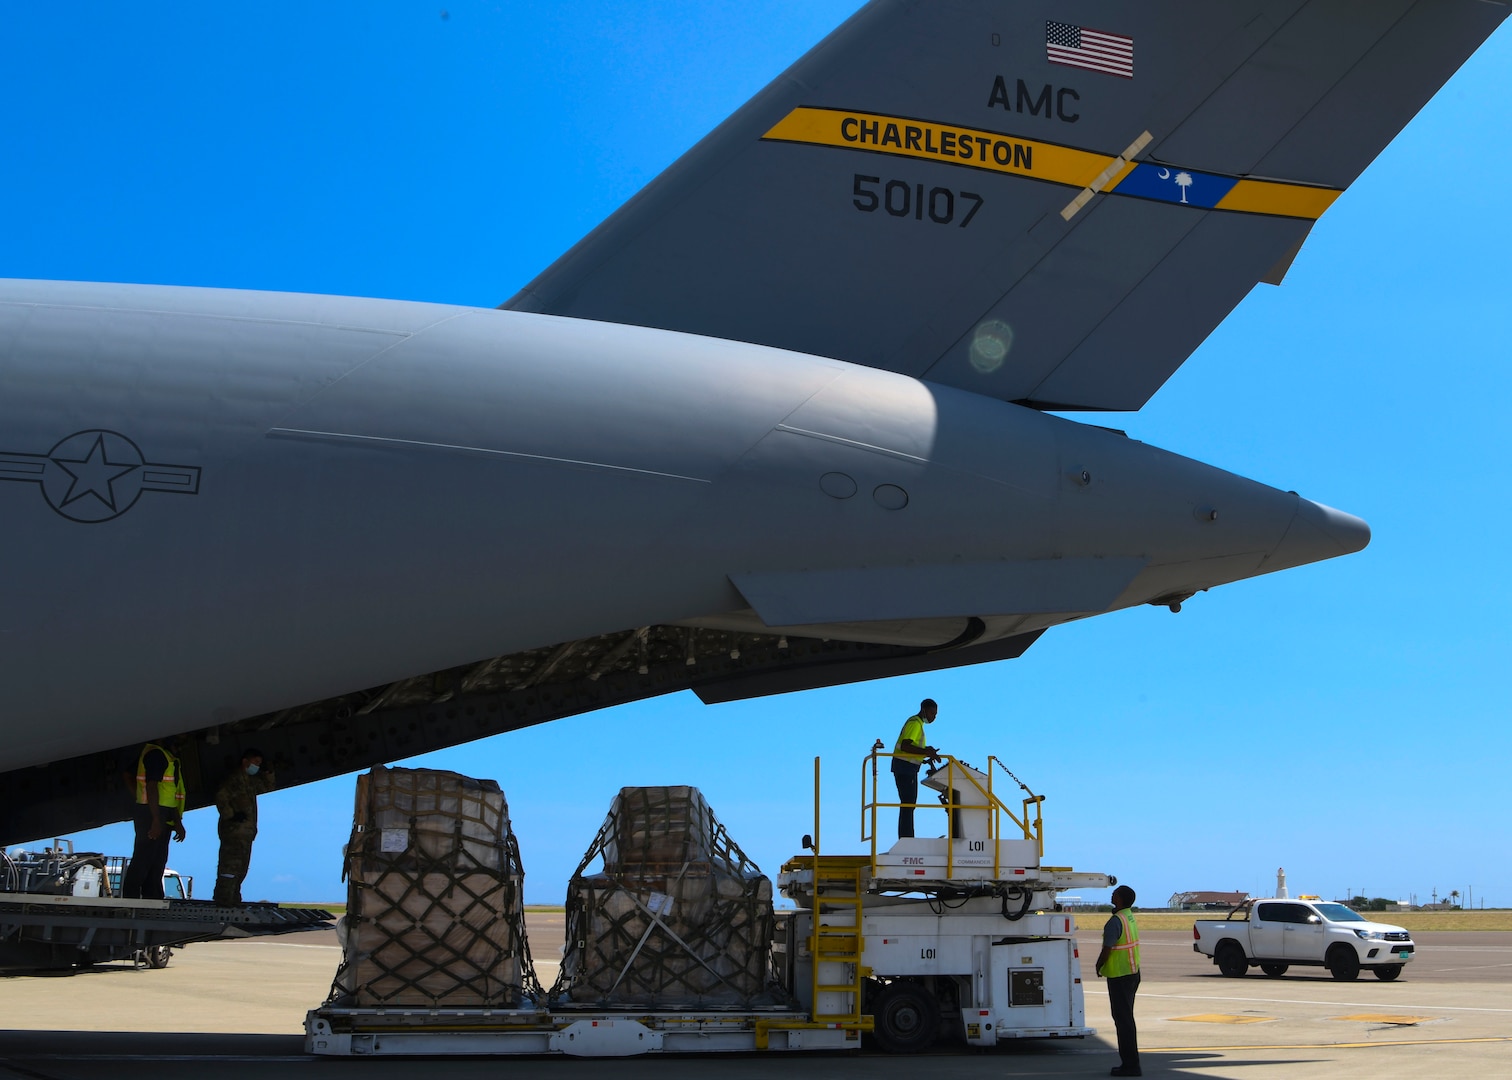 U.S. Air Force Transports Large Field Hospital to Jamaica Donated